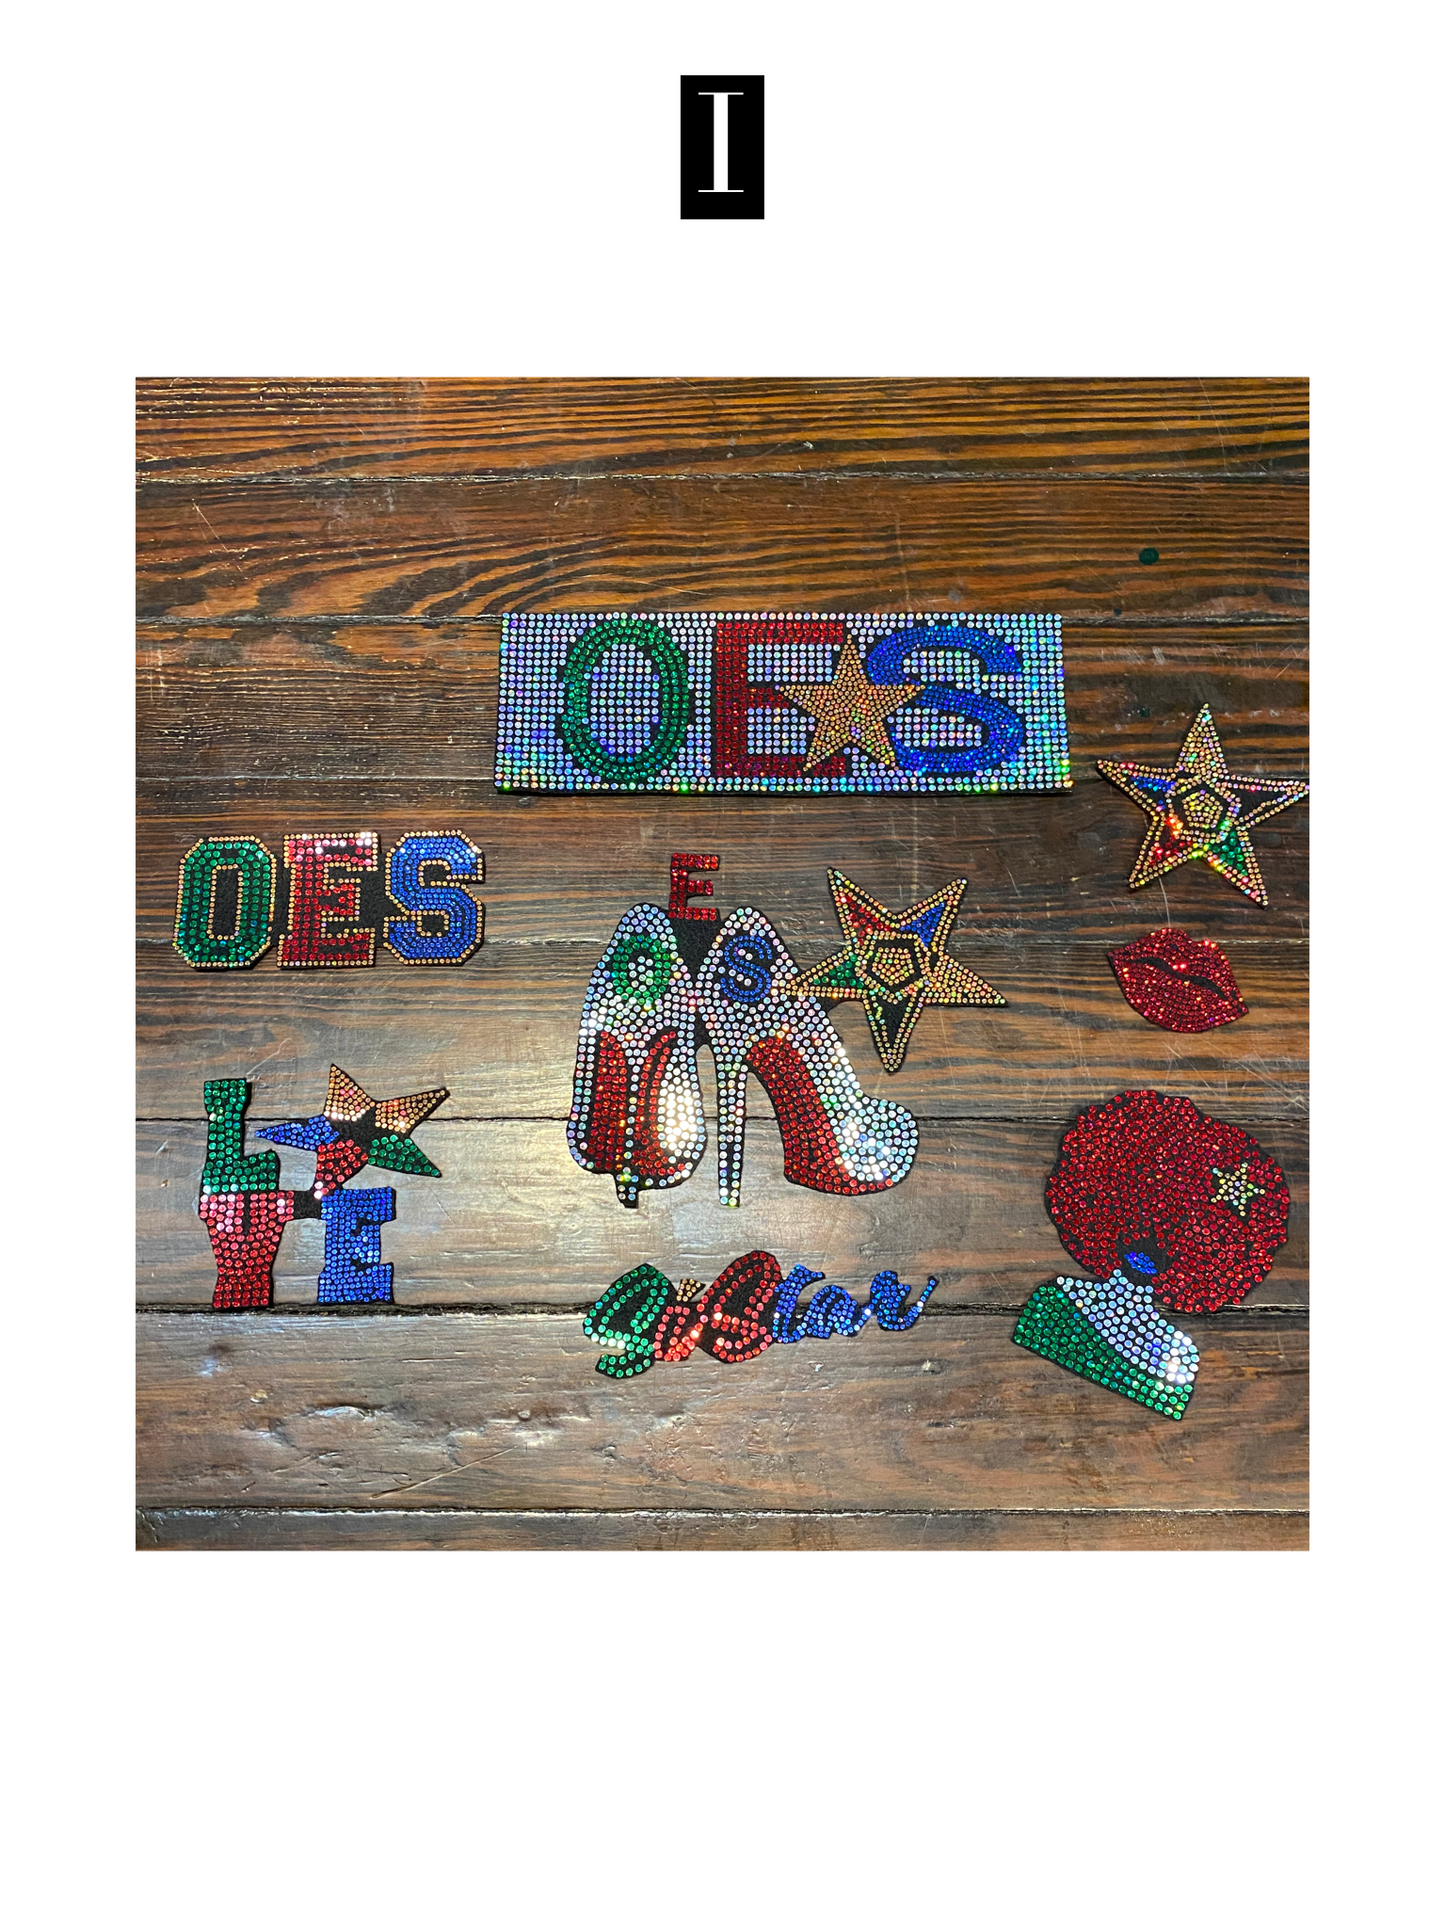 OES PATCH SET